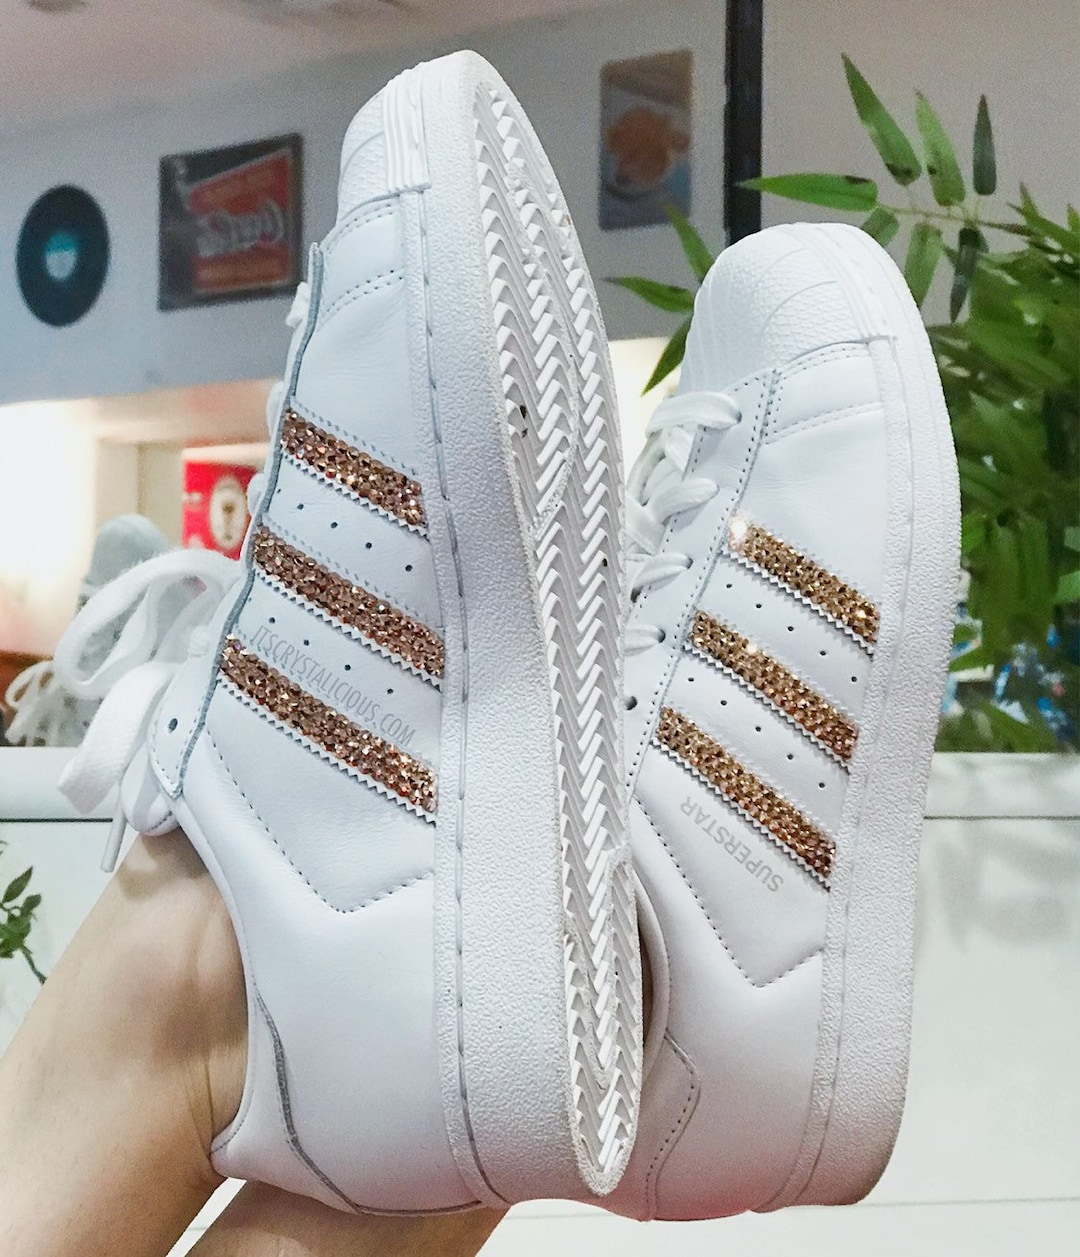 Genuine Bling Adidas Sneakers Embellished With Etsy